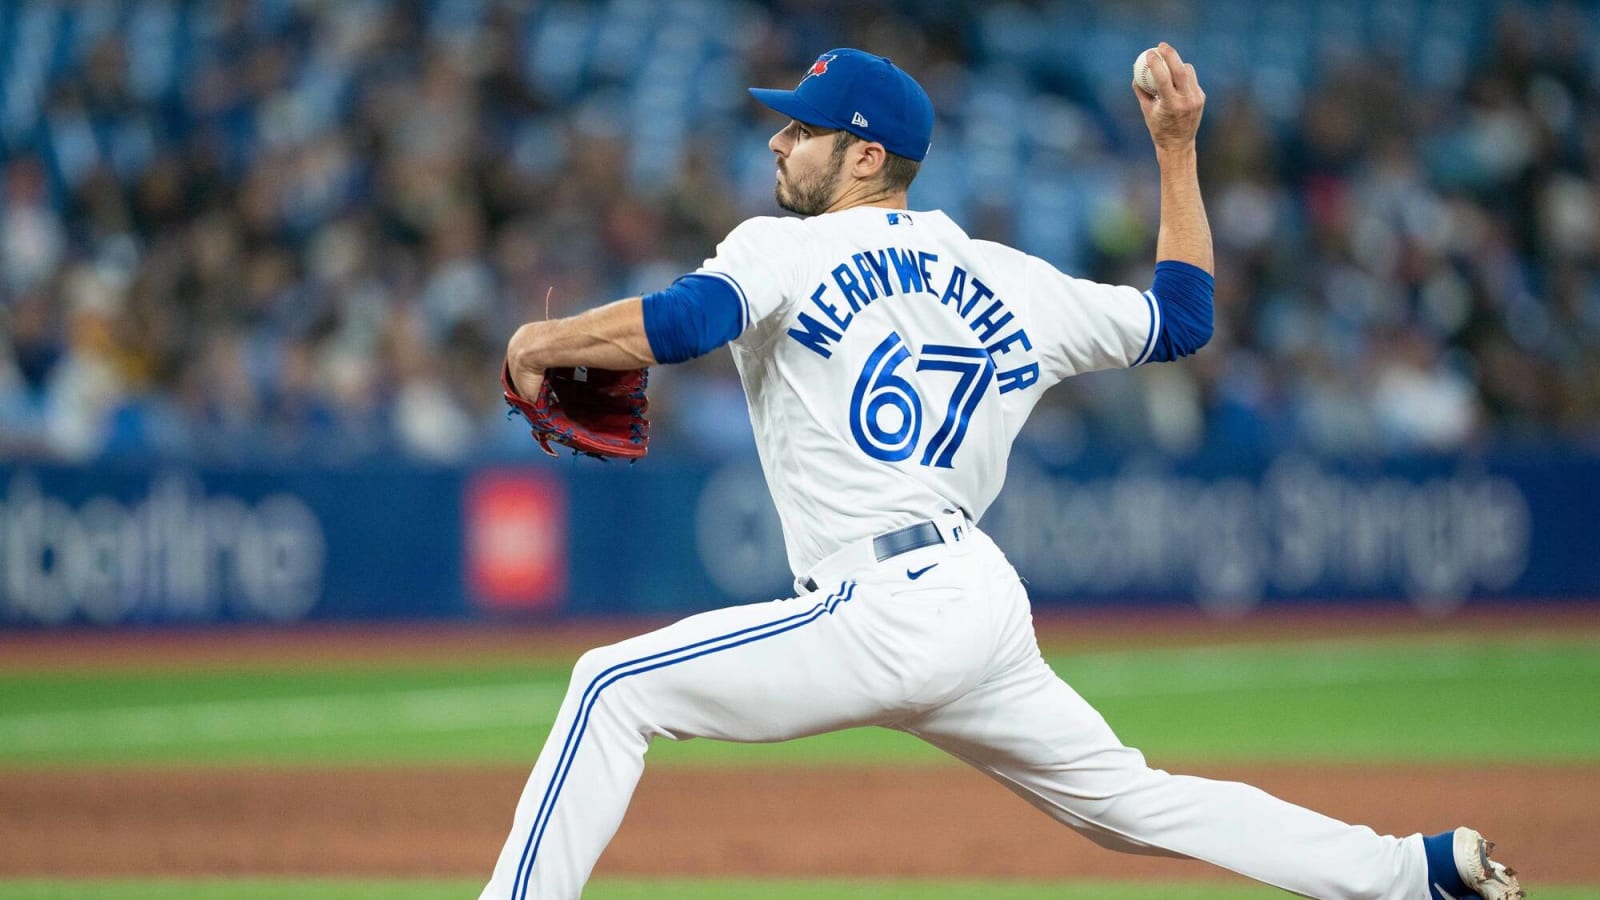 Julian Merryweather will start Game 1 of doubleheader, Blue Jays hope Alek Manoah can pitch Game 2